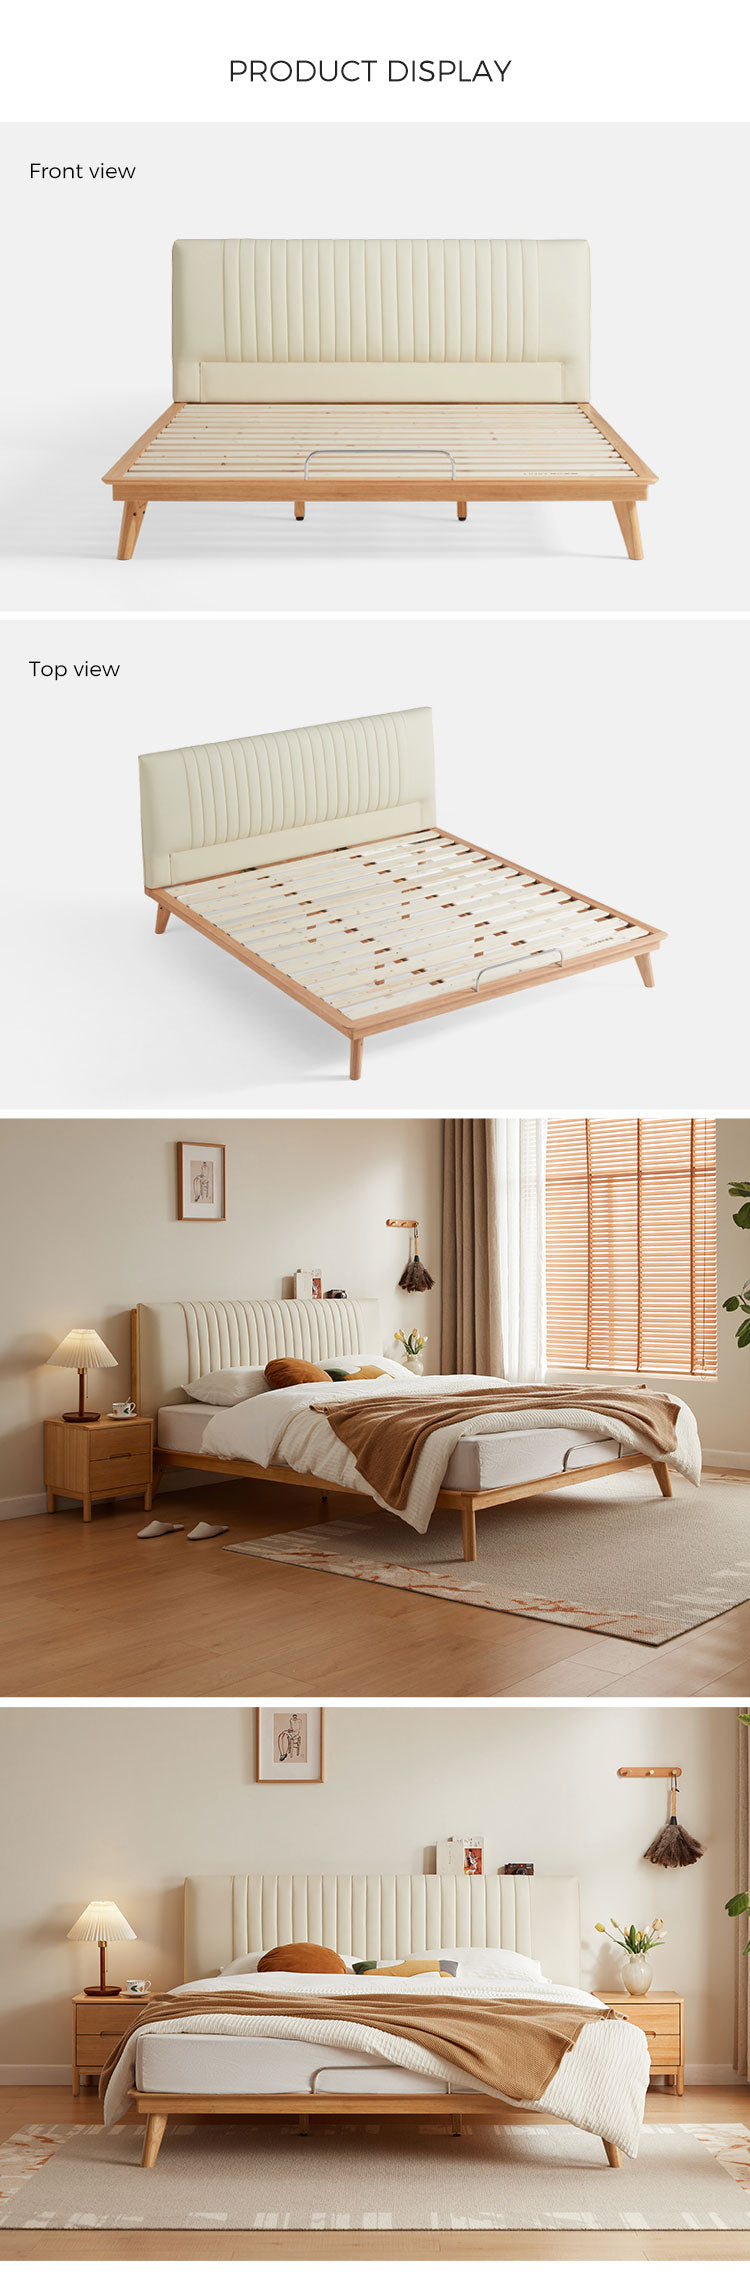 Exquisite Double Bed for a Modern Bedroom Upgrade